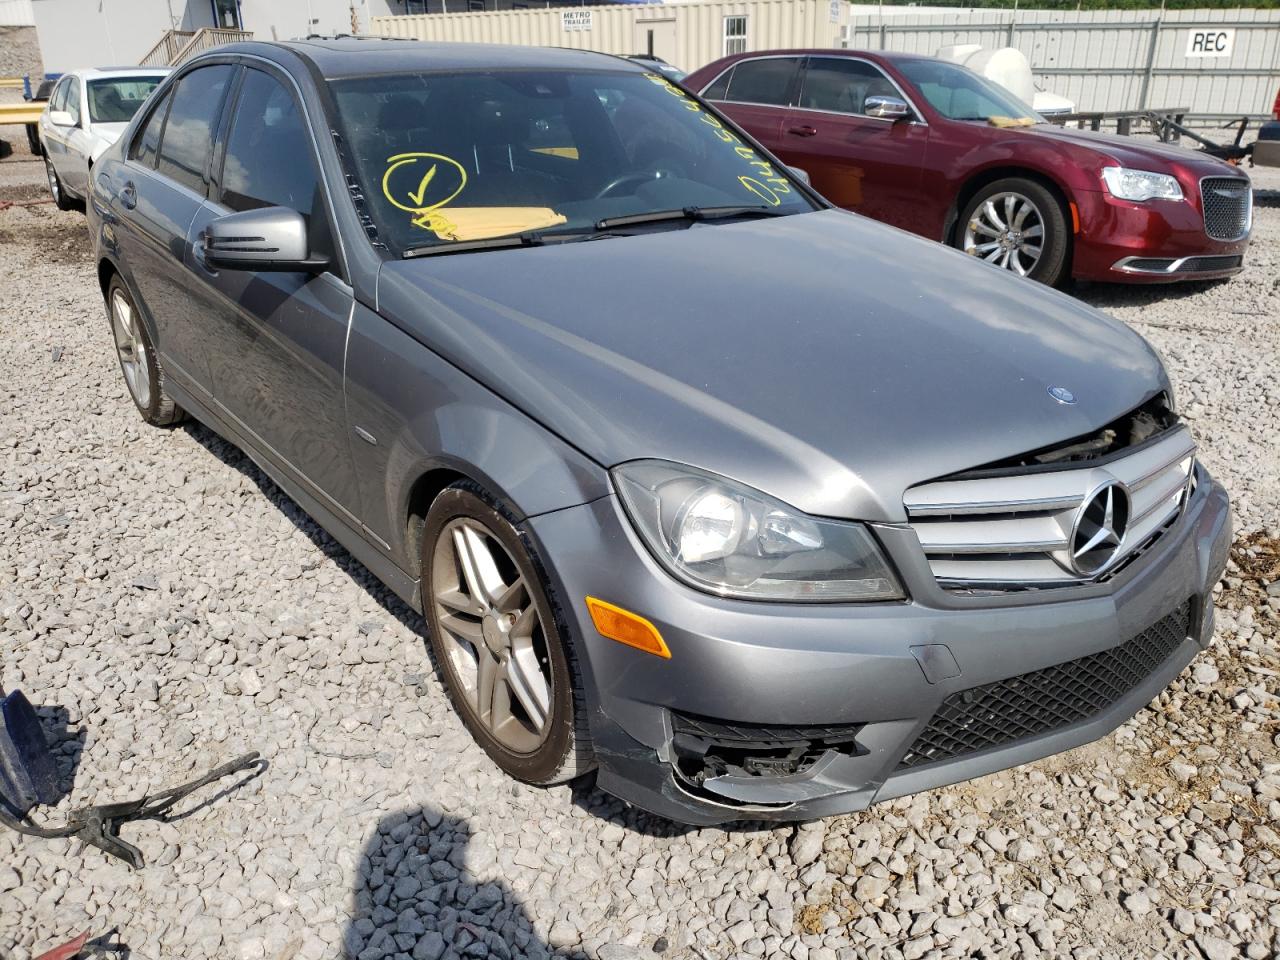 WDDGF5HB1CR****** Salvage and Wrecked 2012 Mercedes-Benz C-Class in AL - Hueytown